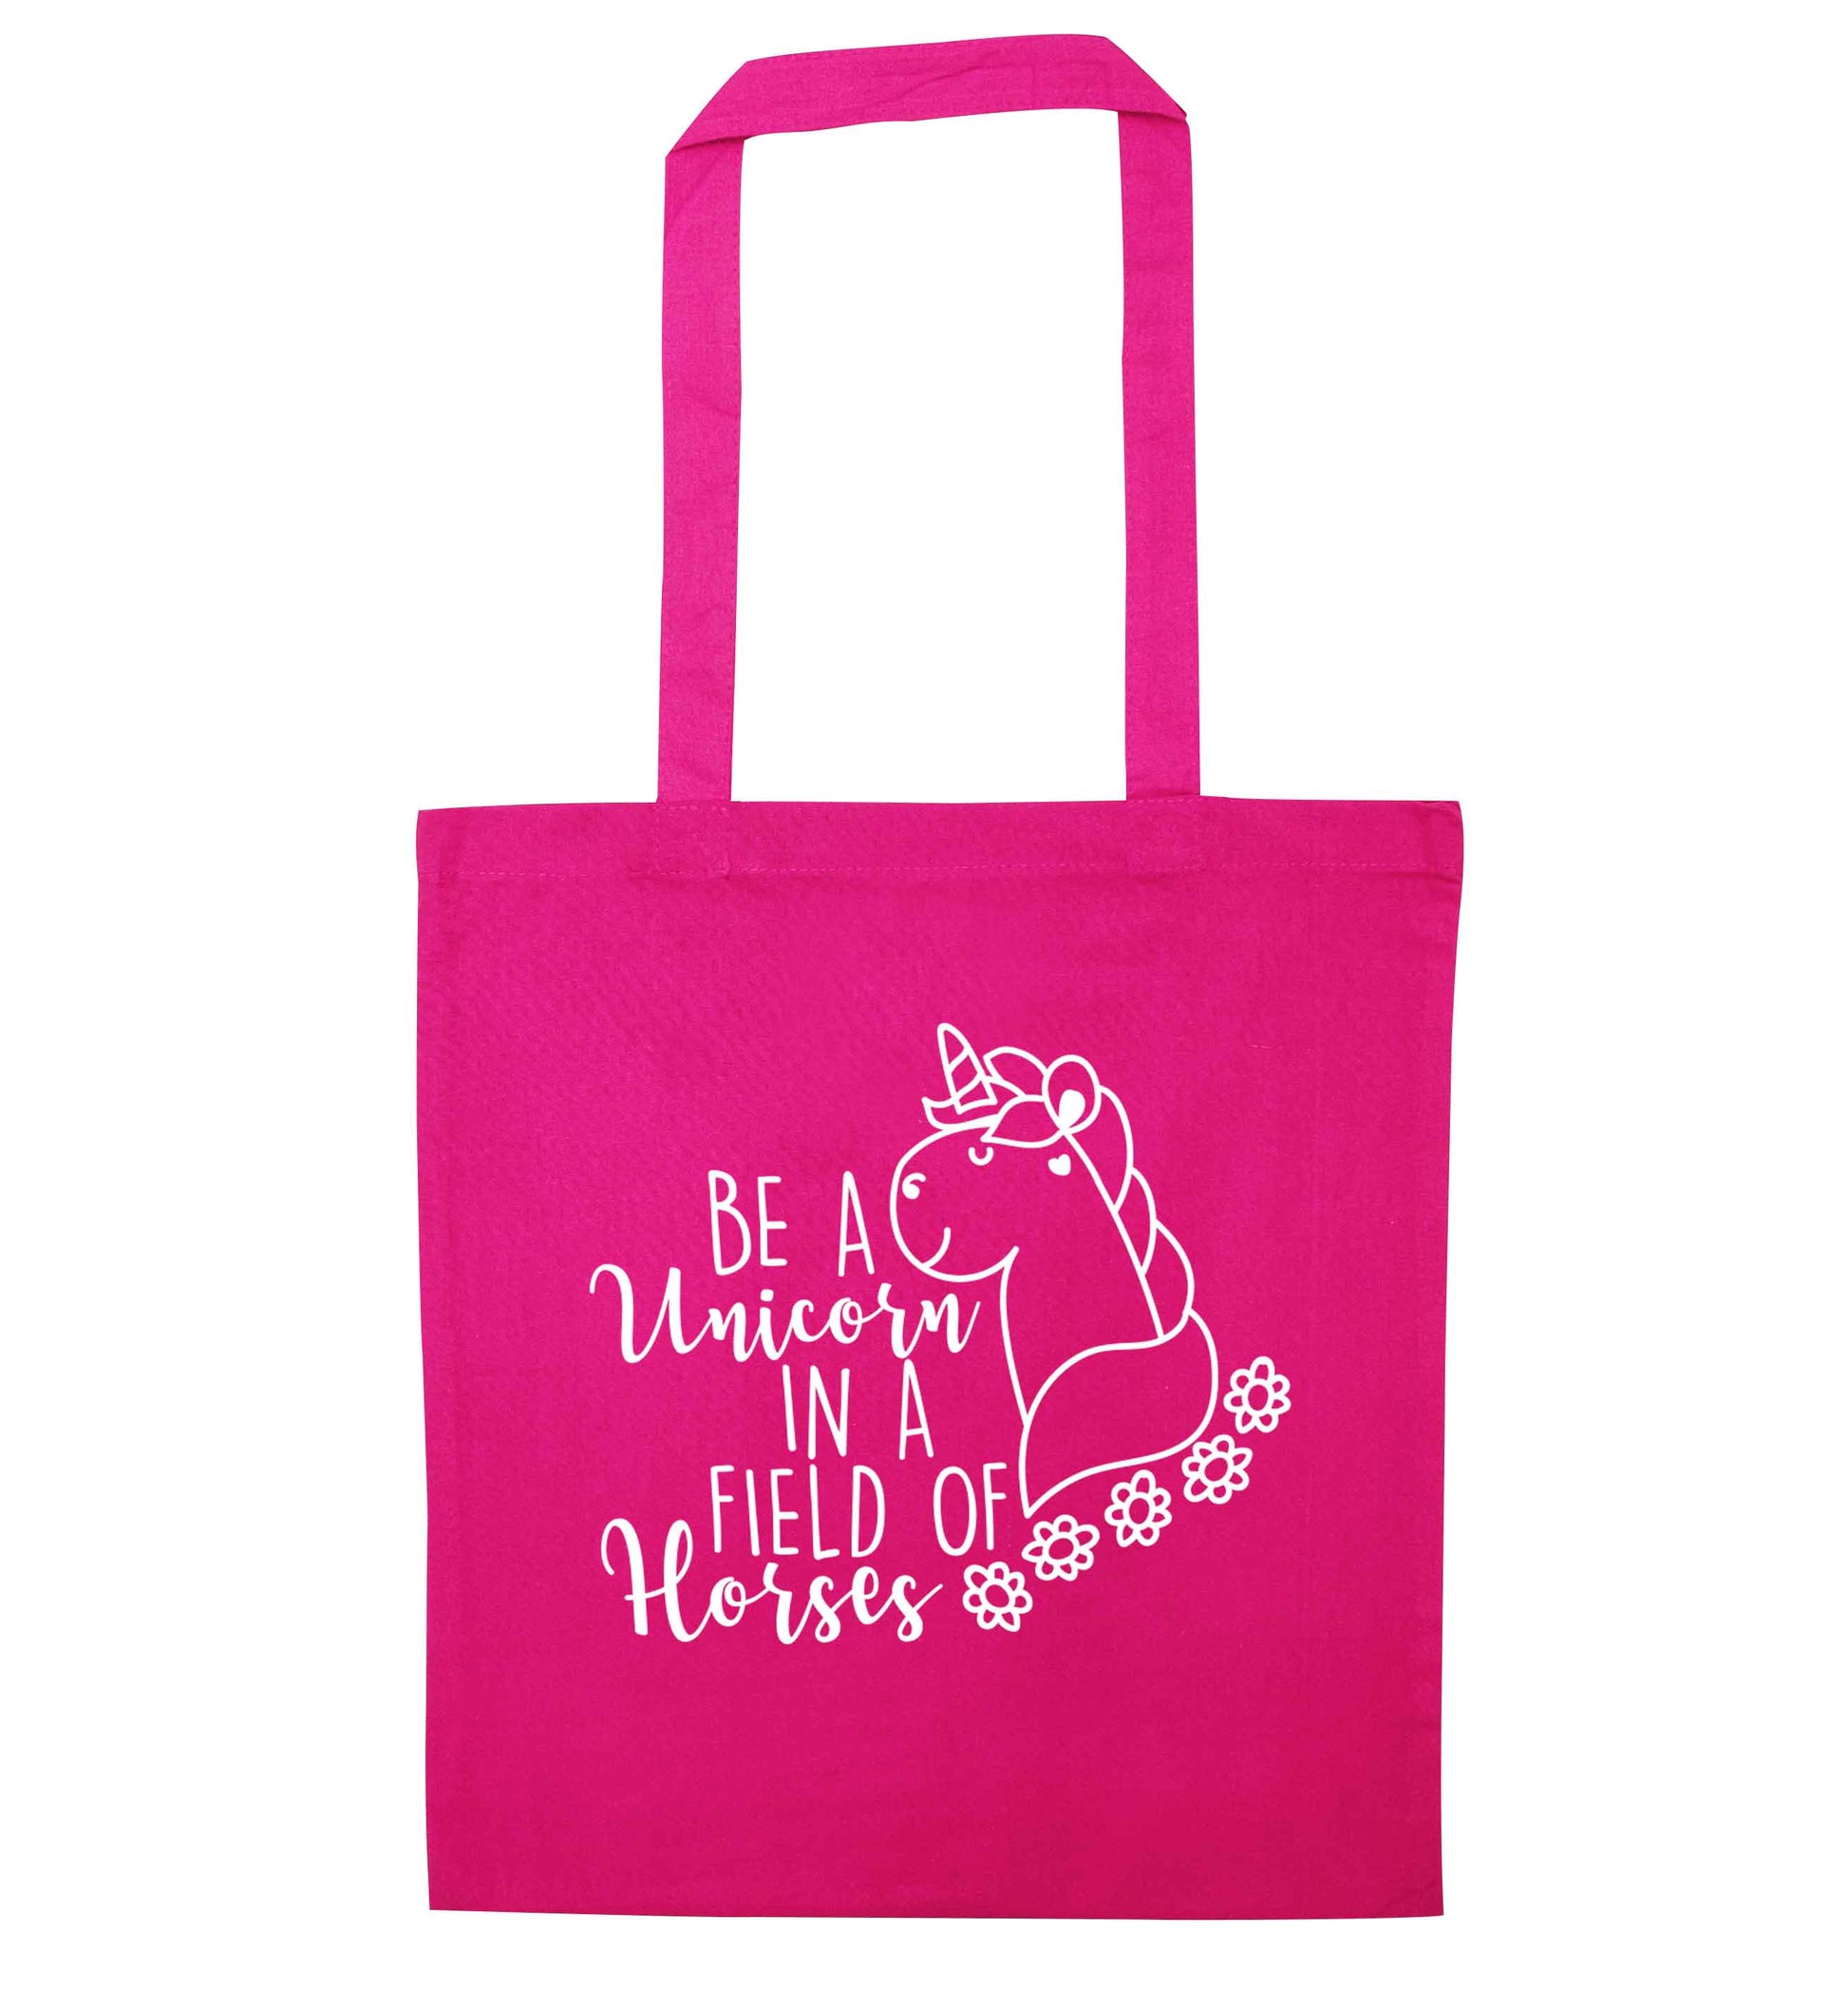 Be a unicorn in a field of horses pink tote bag